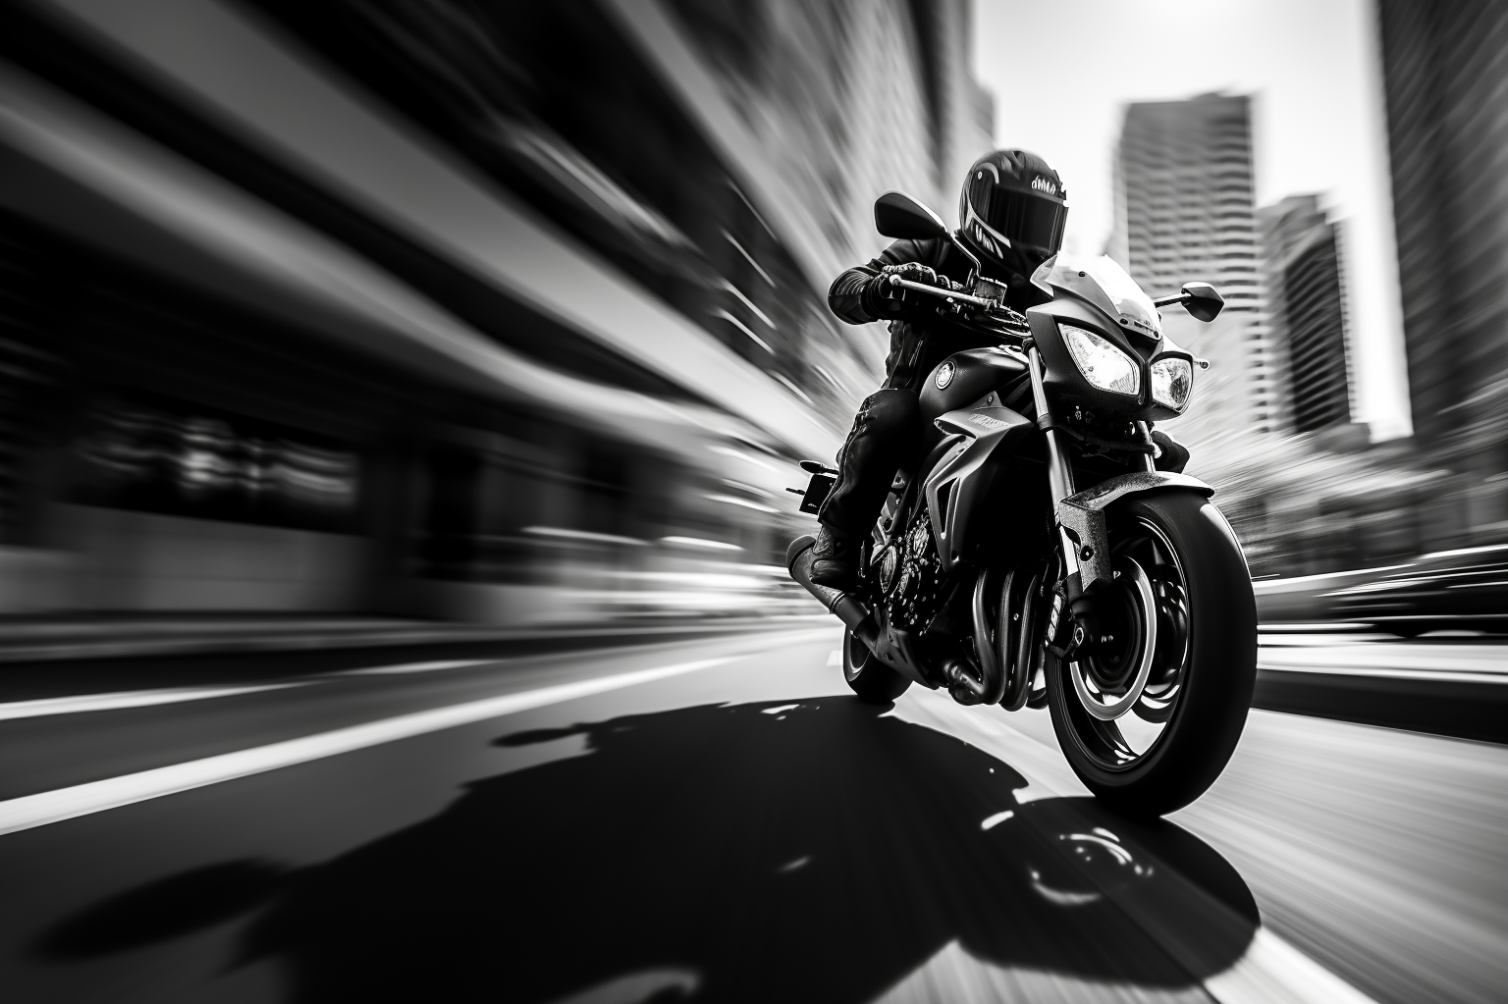 djunemployed_Motorcycle_rider_in_action_motion_blur_background__4e27e9f1-69d4-4933-a035-75bb4ae3449f.png